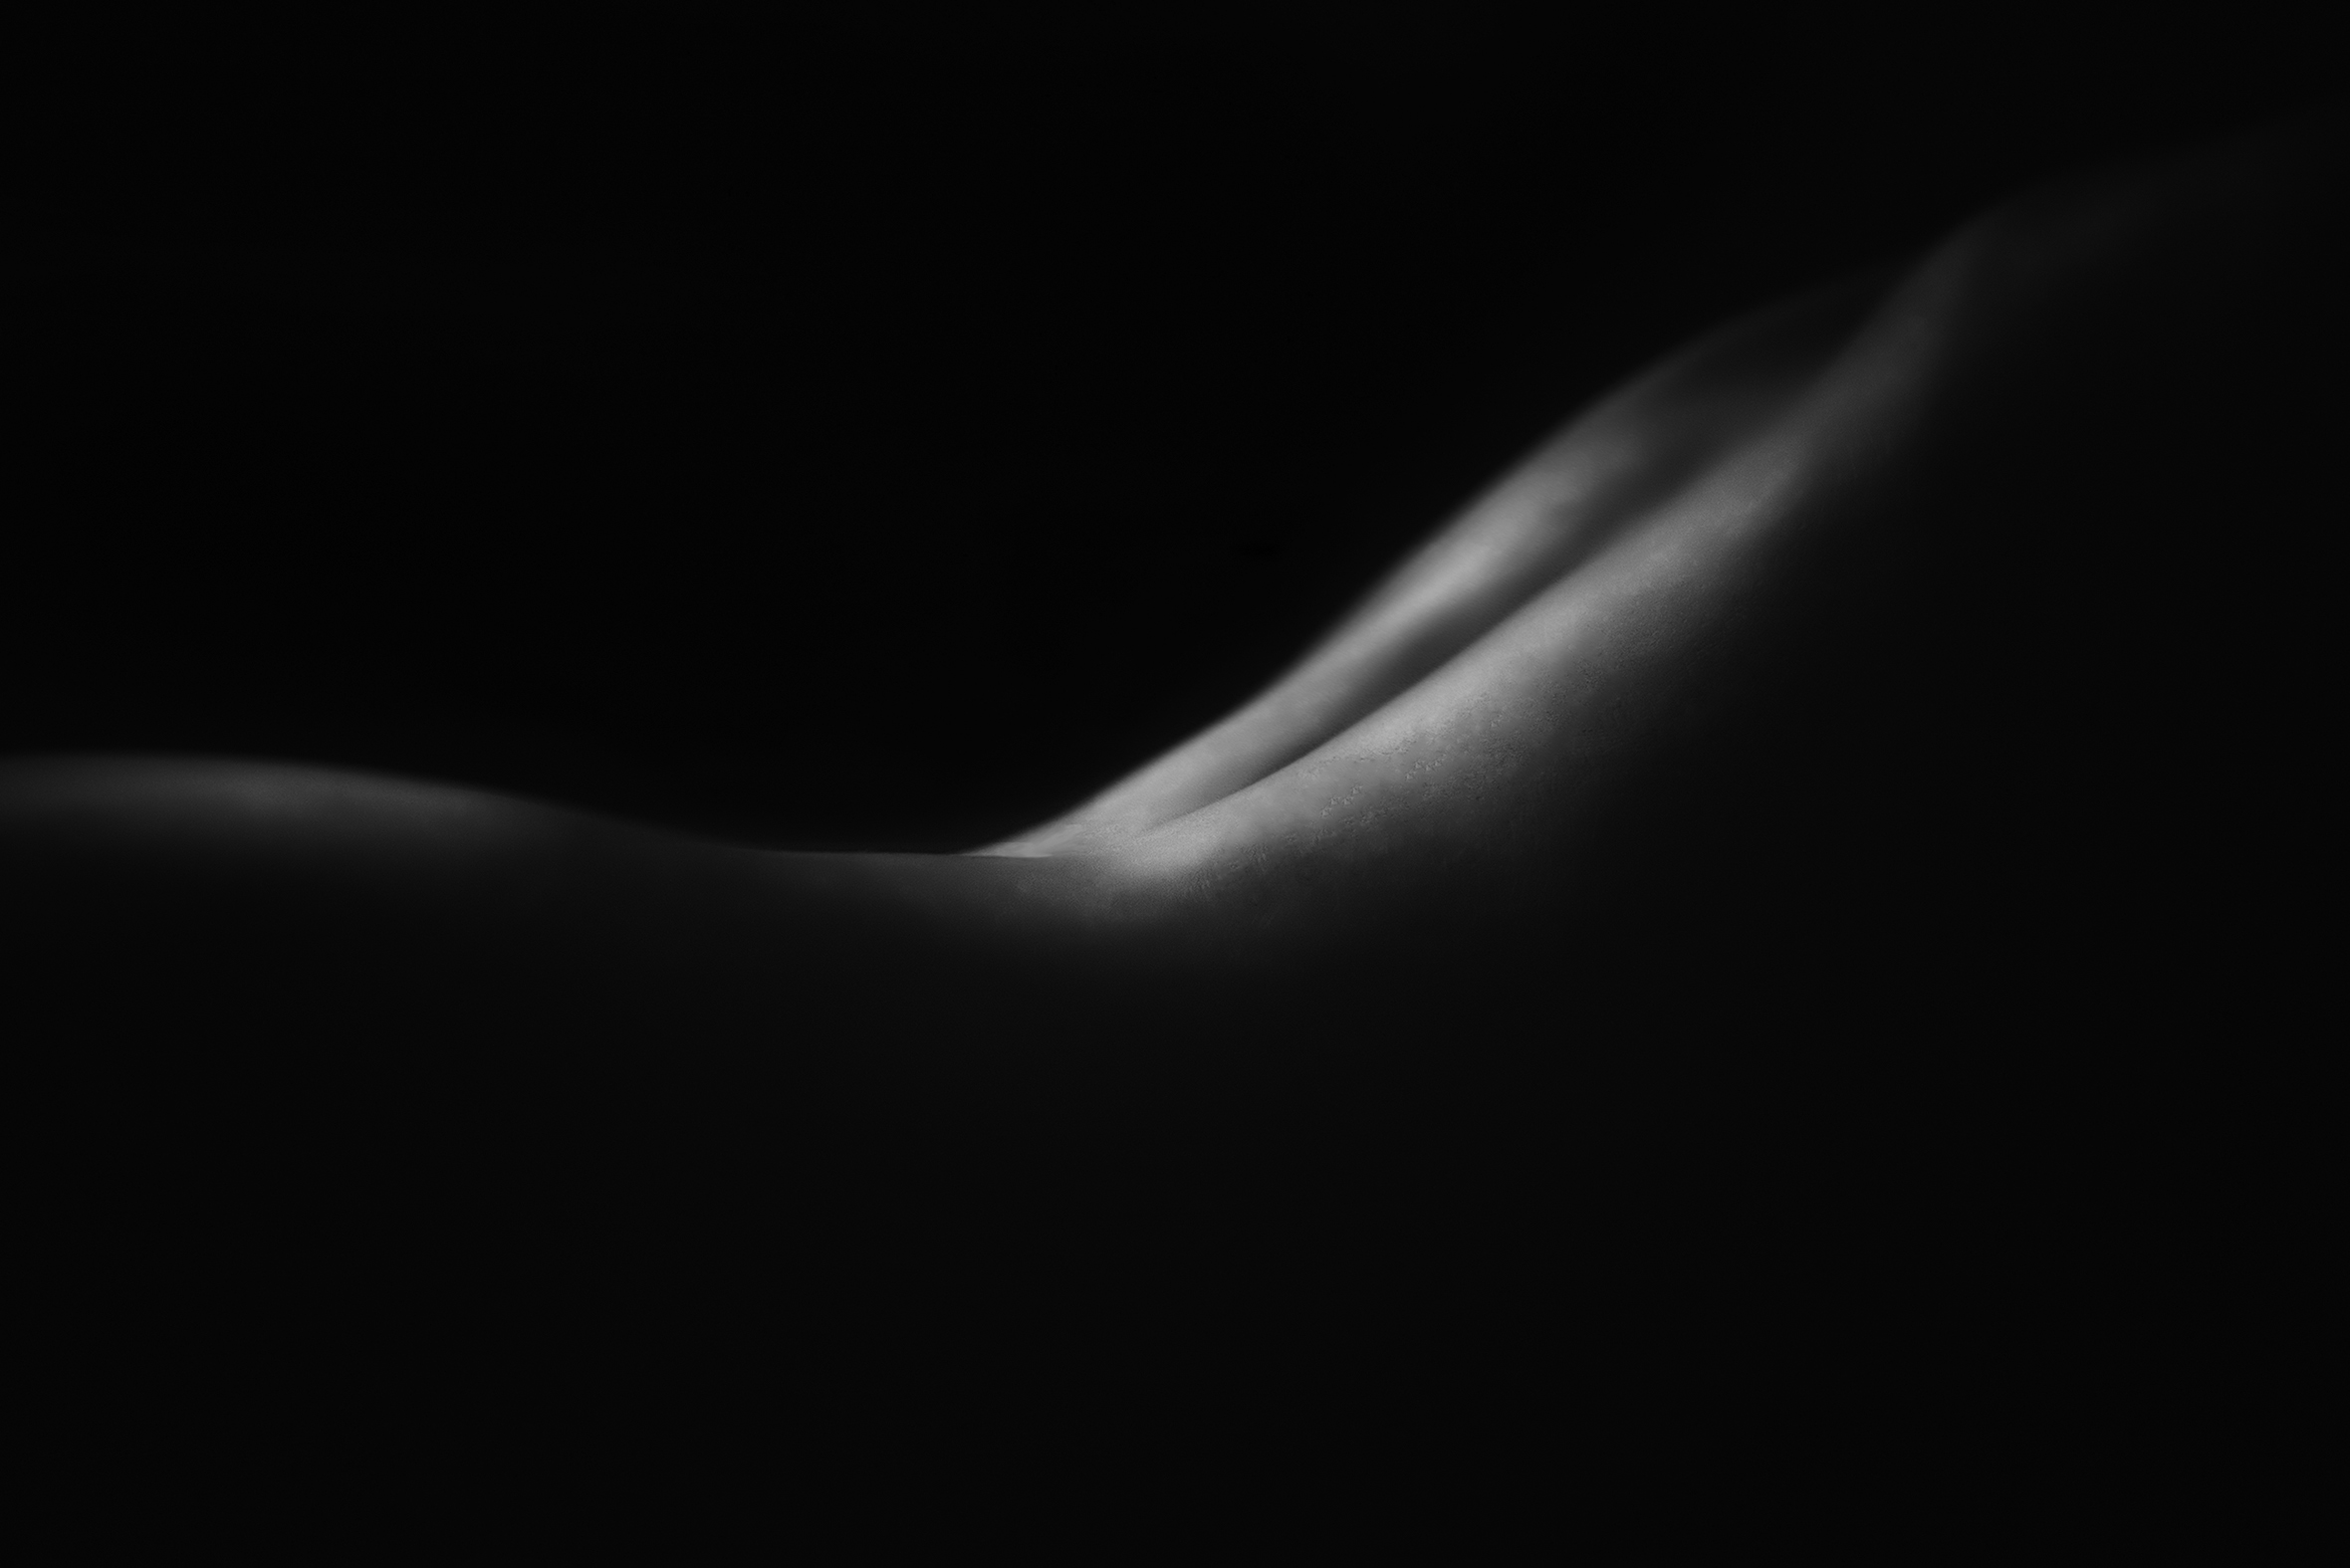 The curve of a woman’s spine accentuated and abstracted by the tiniest bit of light touching her skin.